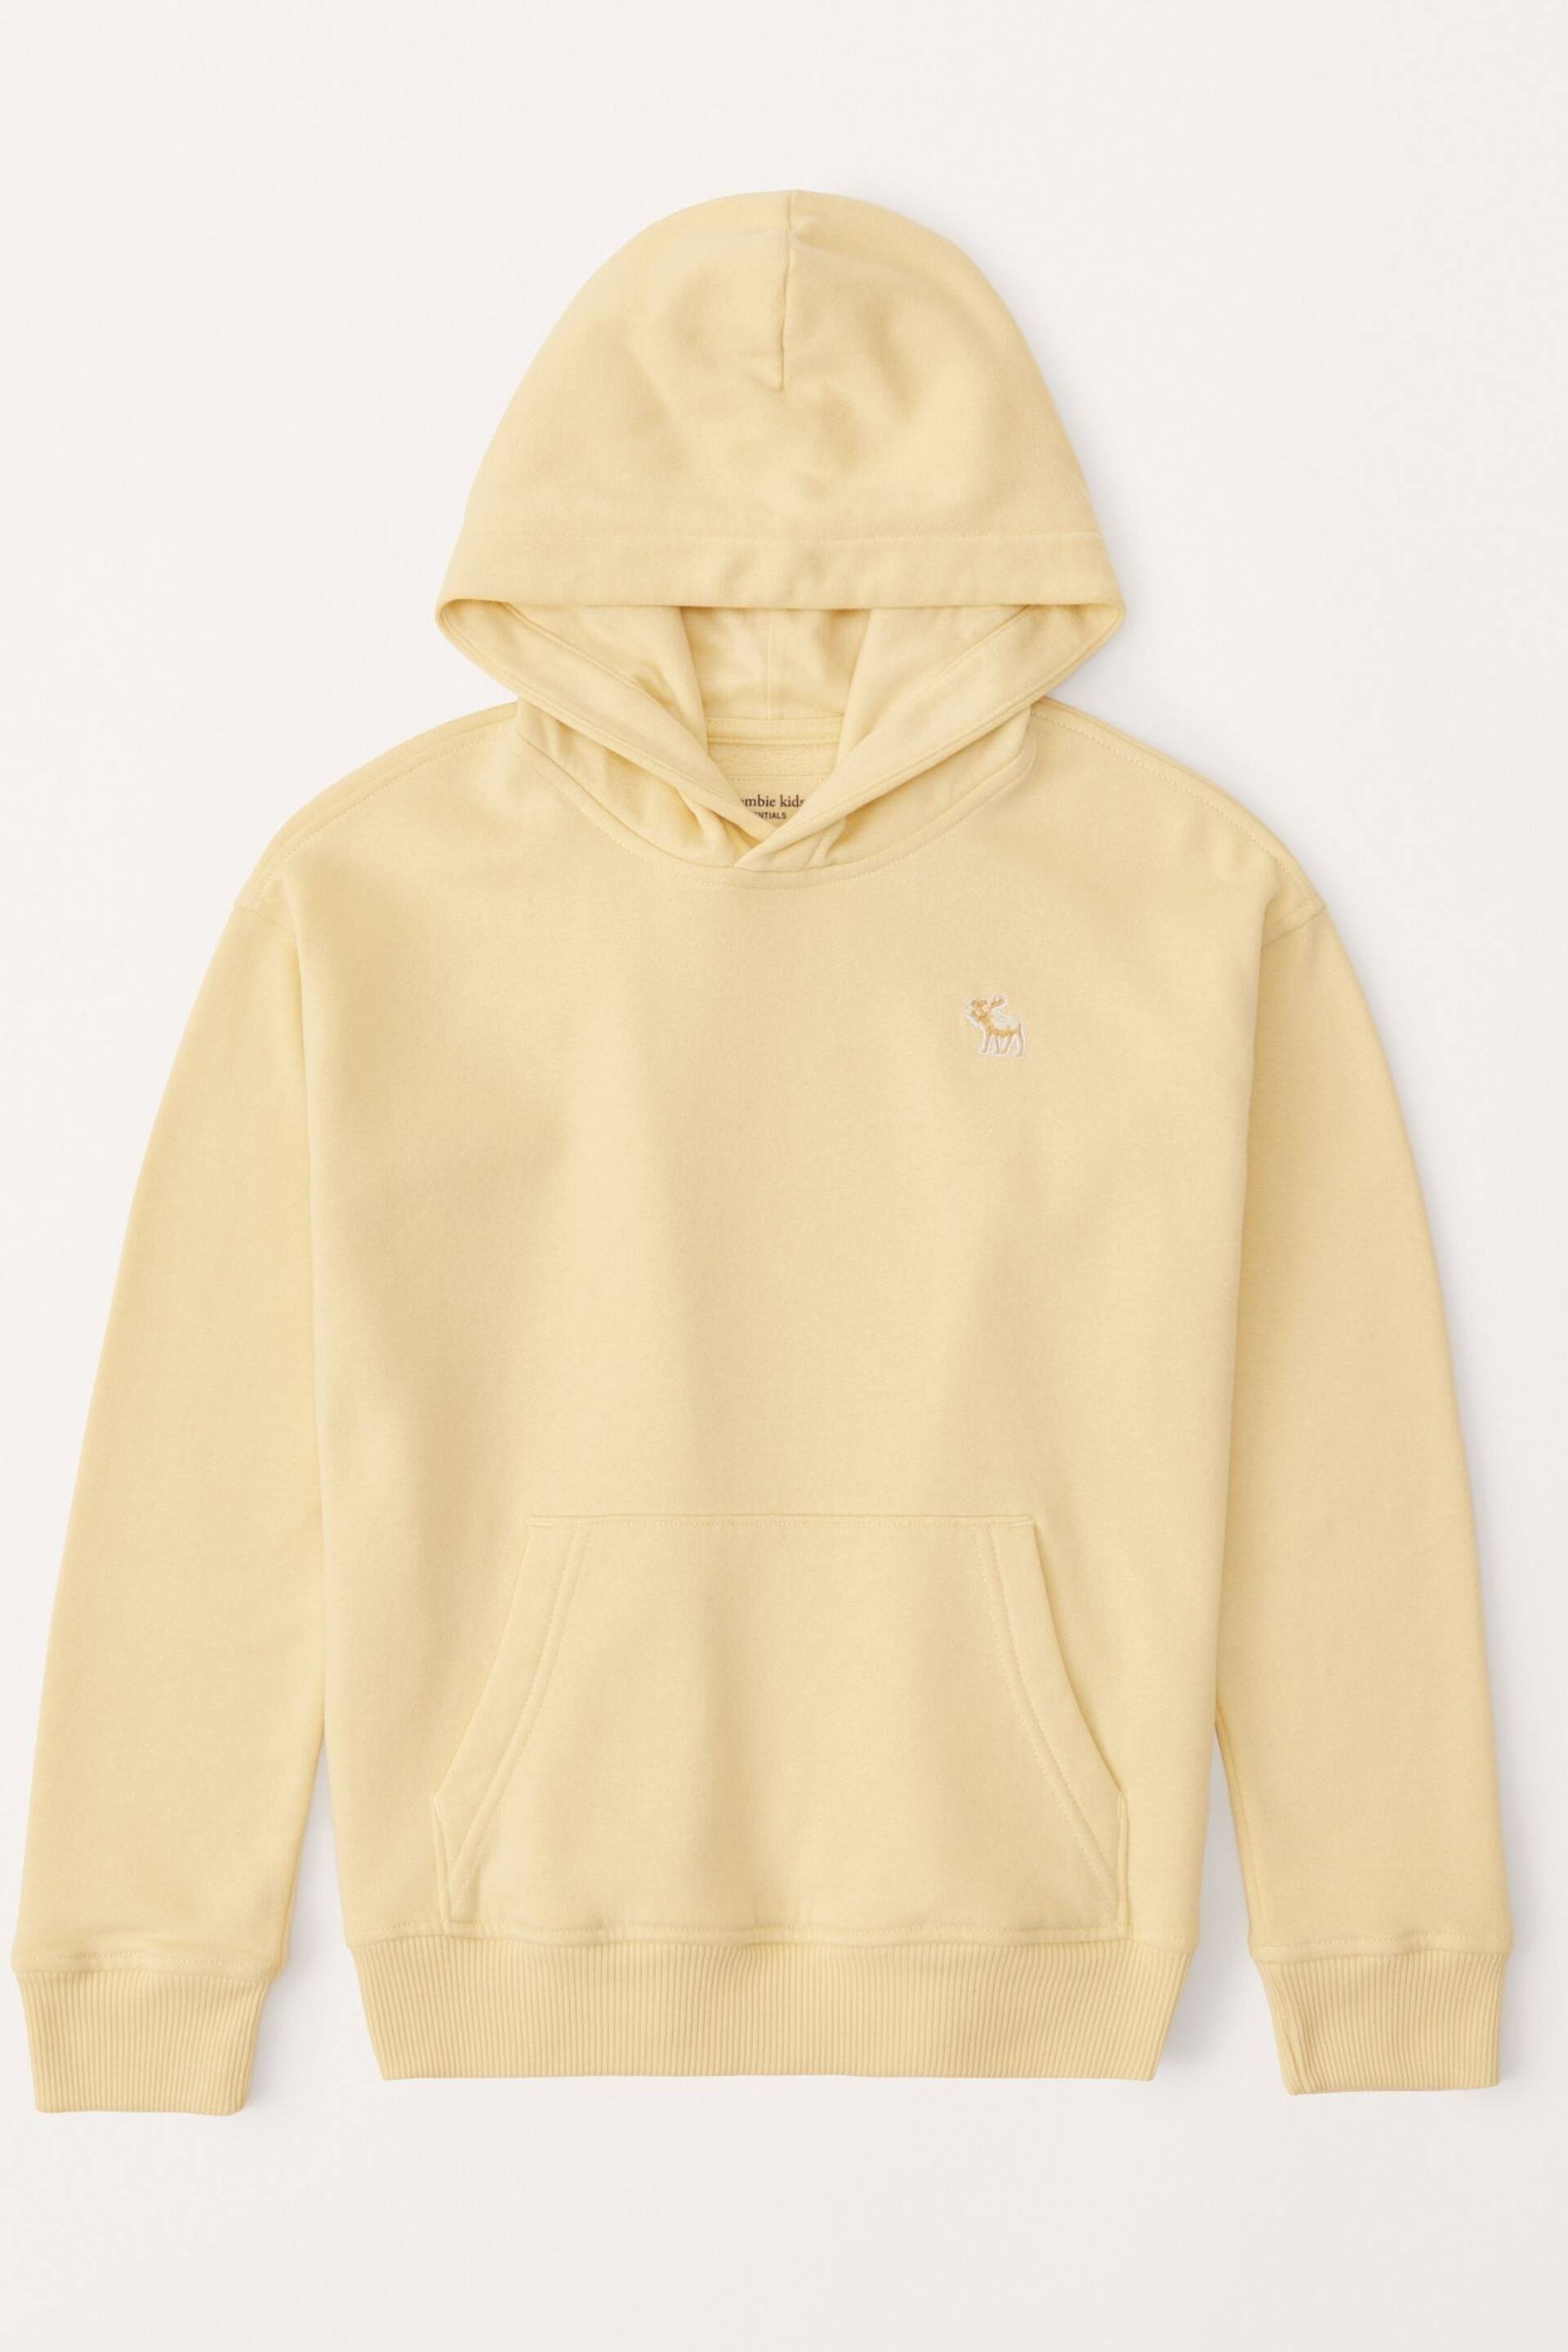 Abercrombie & Fitch Yellow Essential Relaxed Fit Hoodie - Image 1 of 3